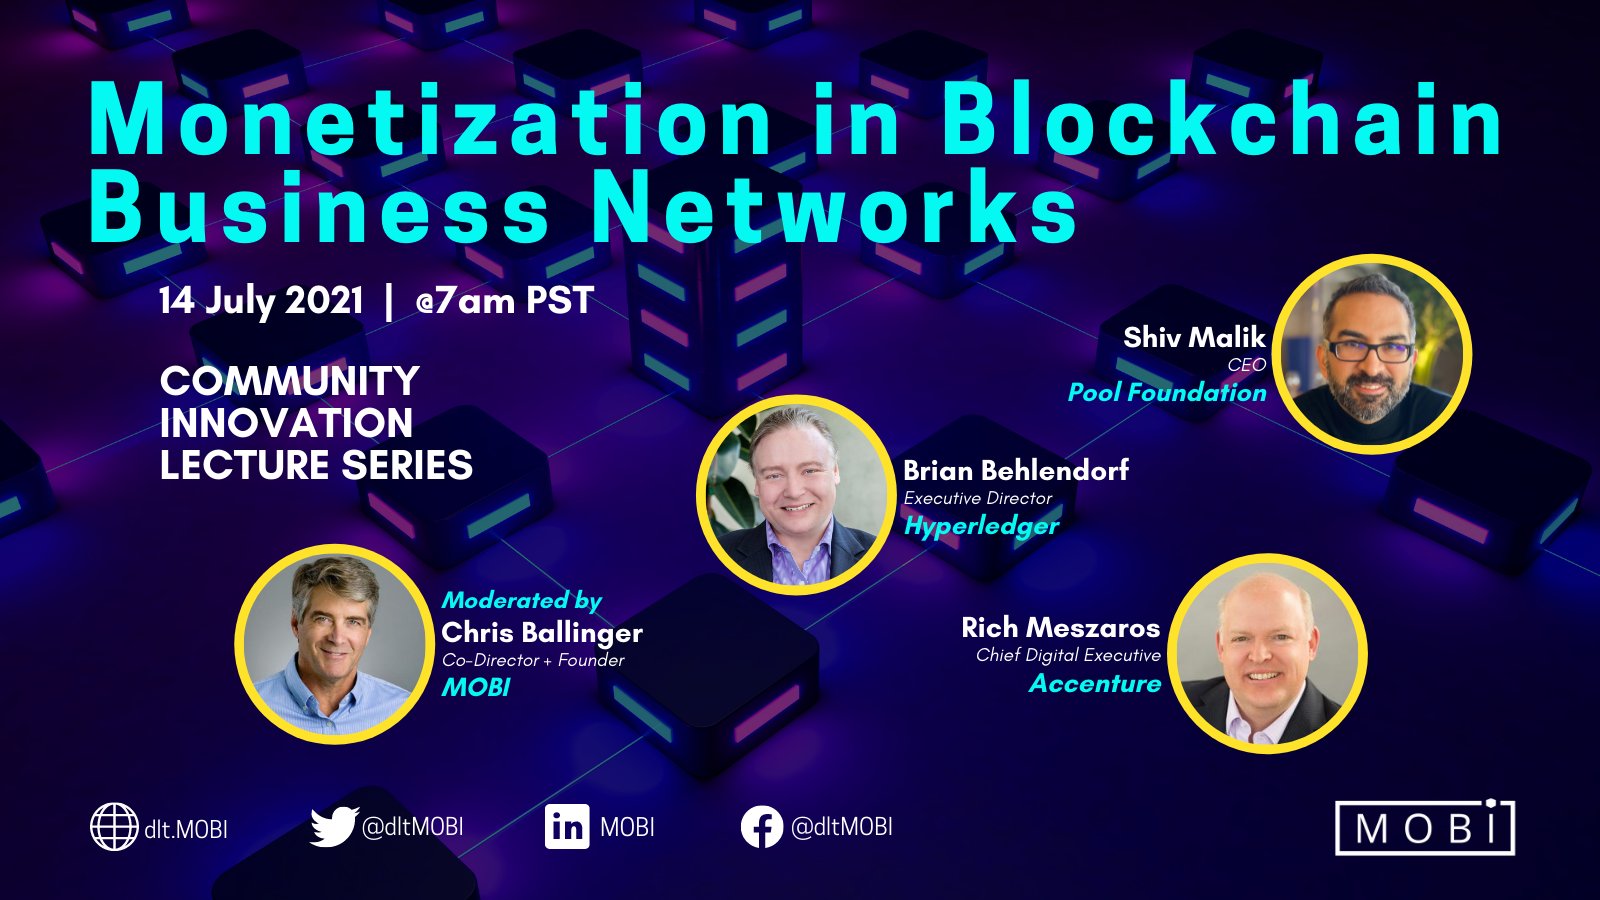 Community Innovation Lecture Series: Monetization in Blockchain Business Networks